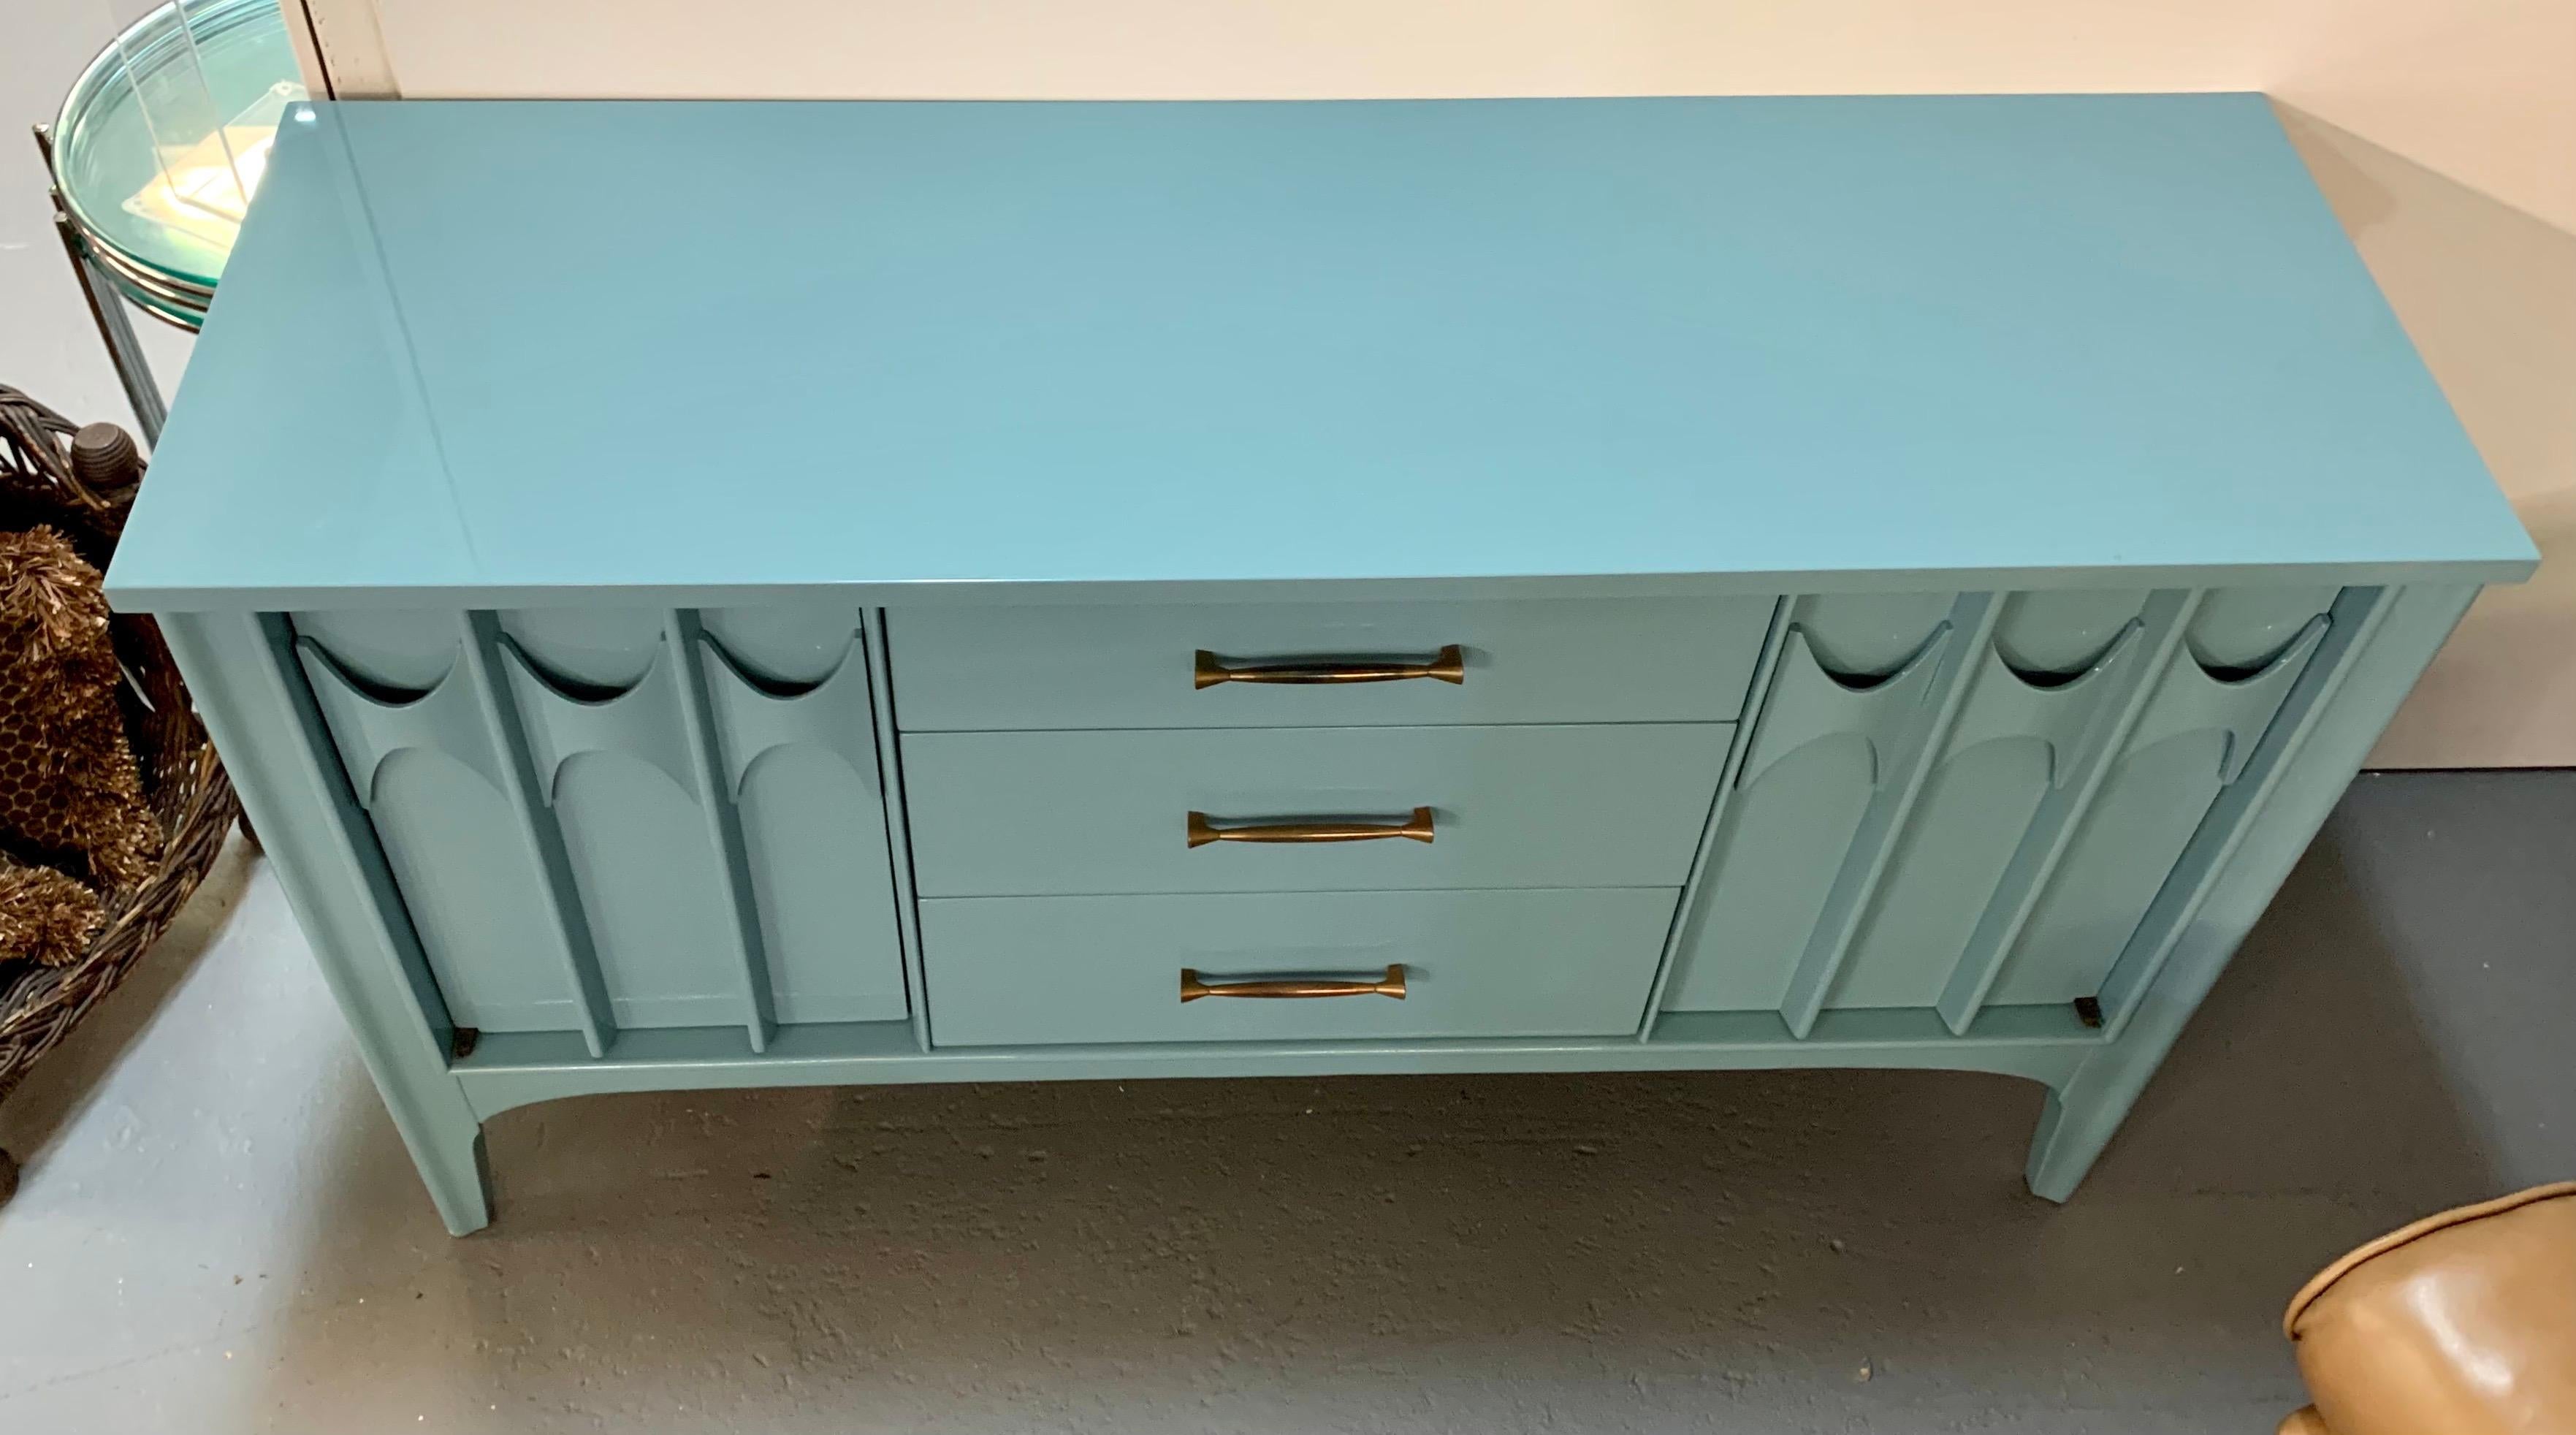 Mid century credenza buffet sideboard newly lacquered in a robin’s egg blue color. It has three center drawers and two side doors with sculptural fronts.